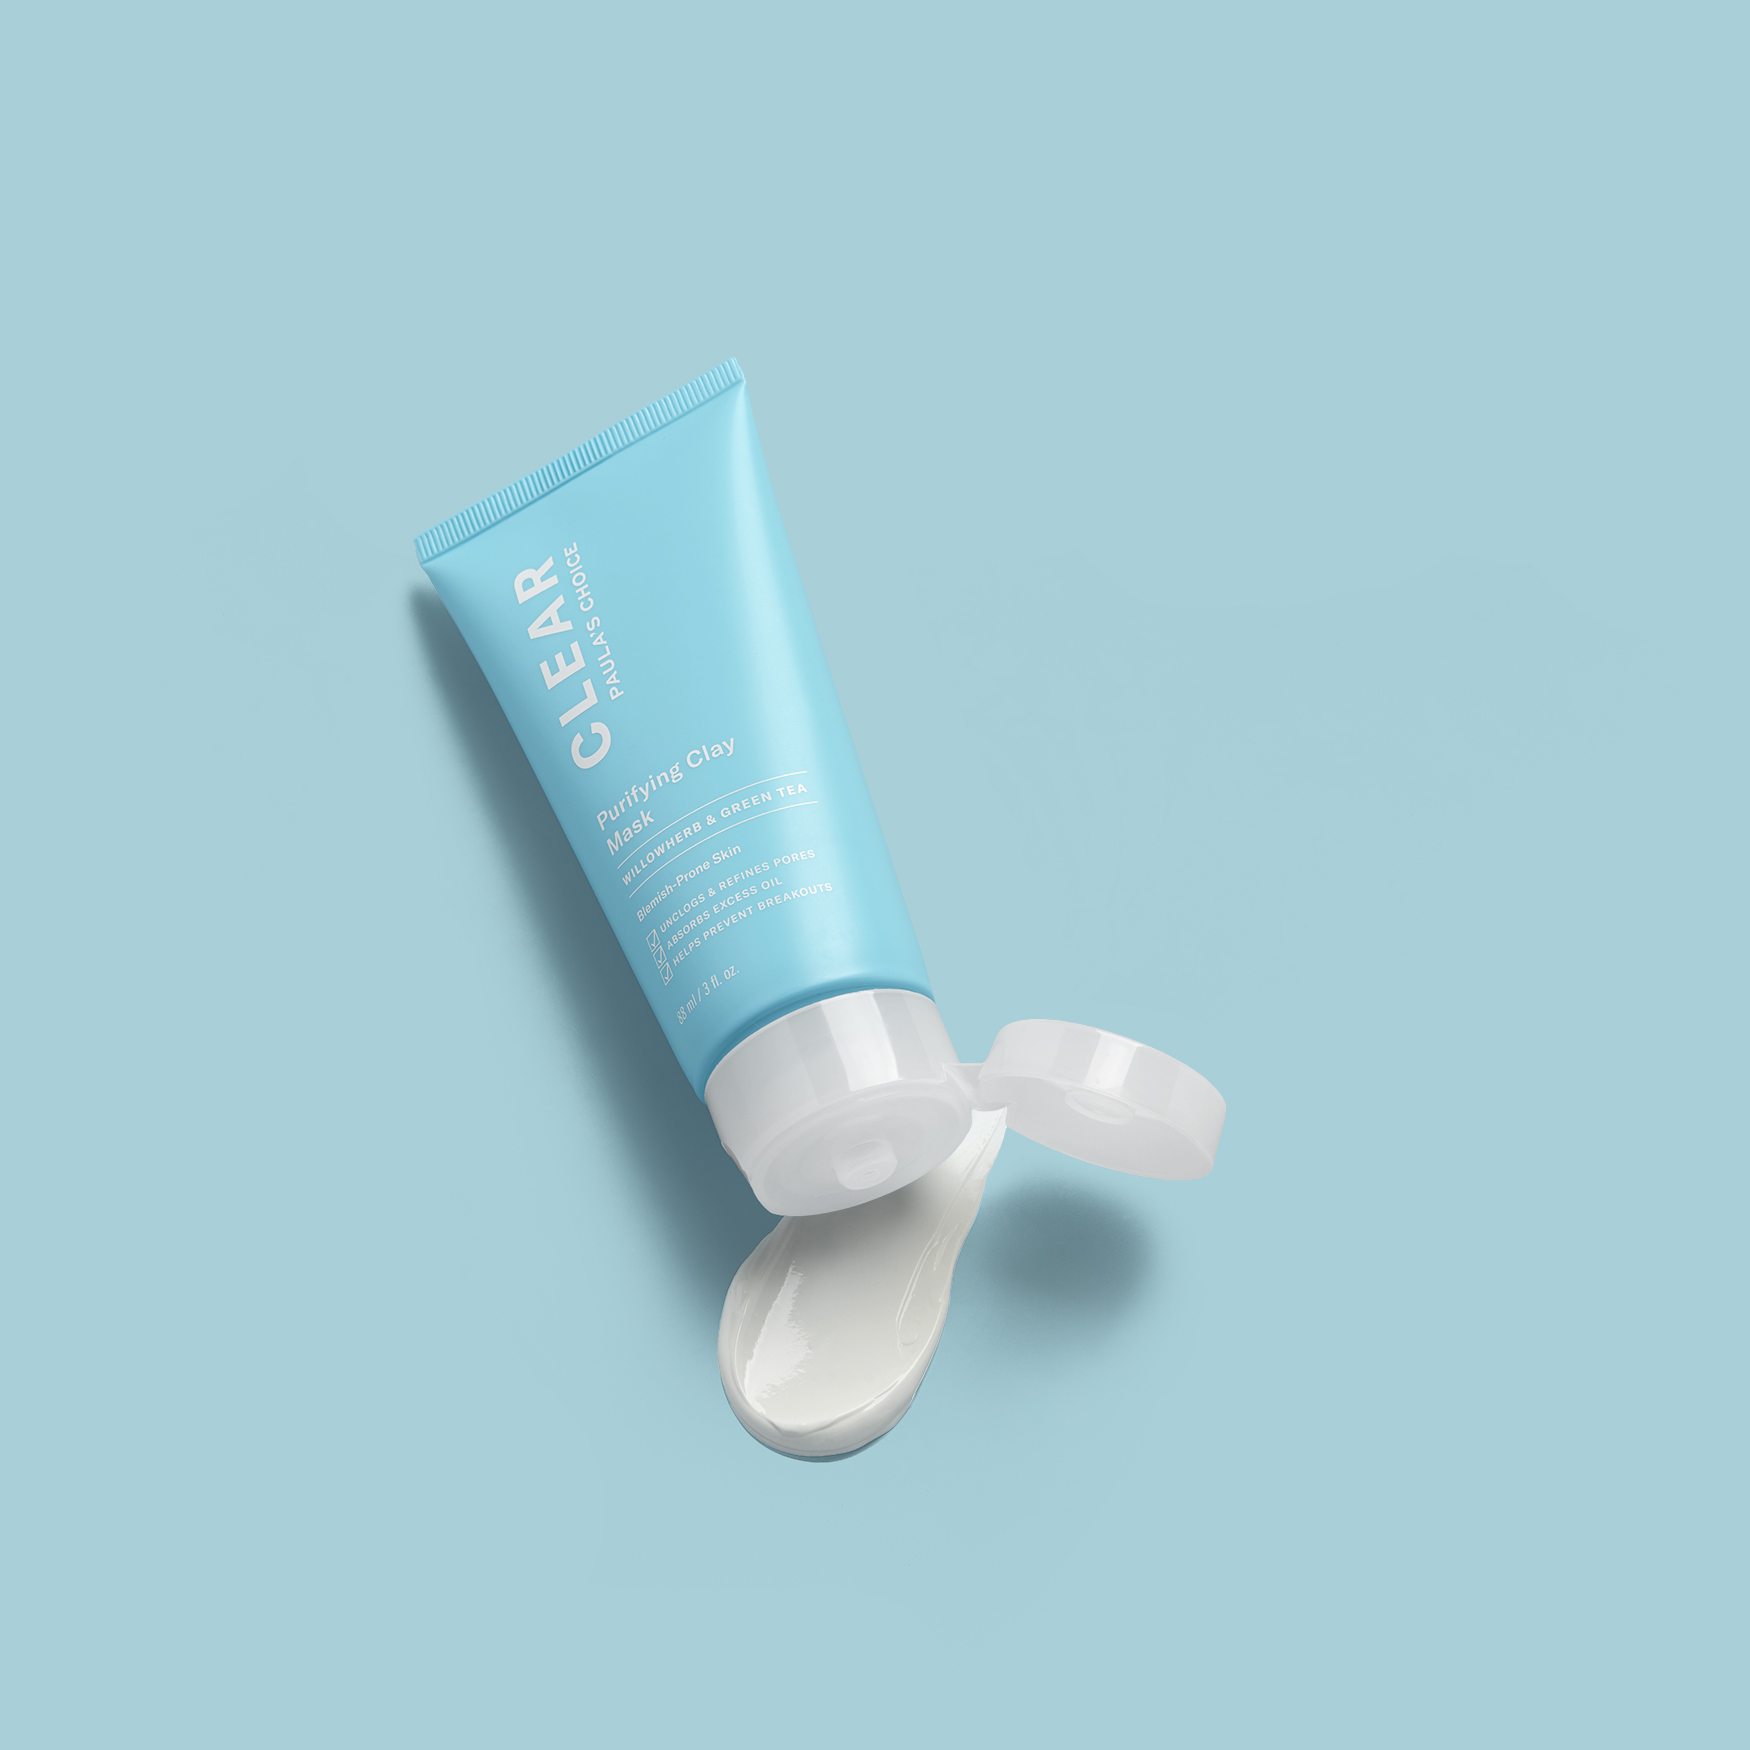 chrysant afdeling duidelijkheid Paula's Choice Clear Purifying Clay Mask | Space NK